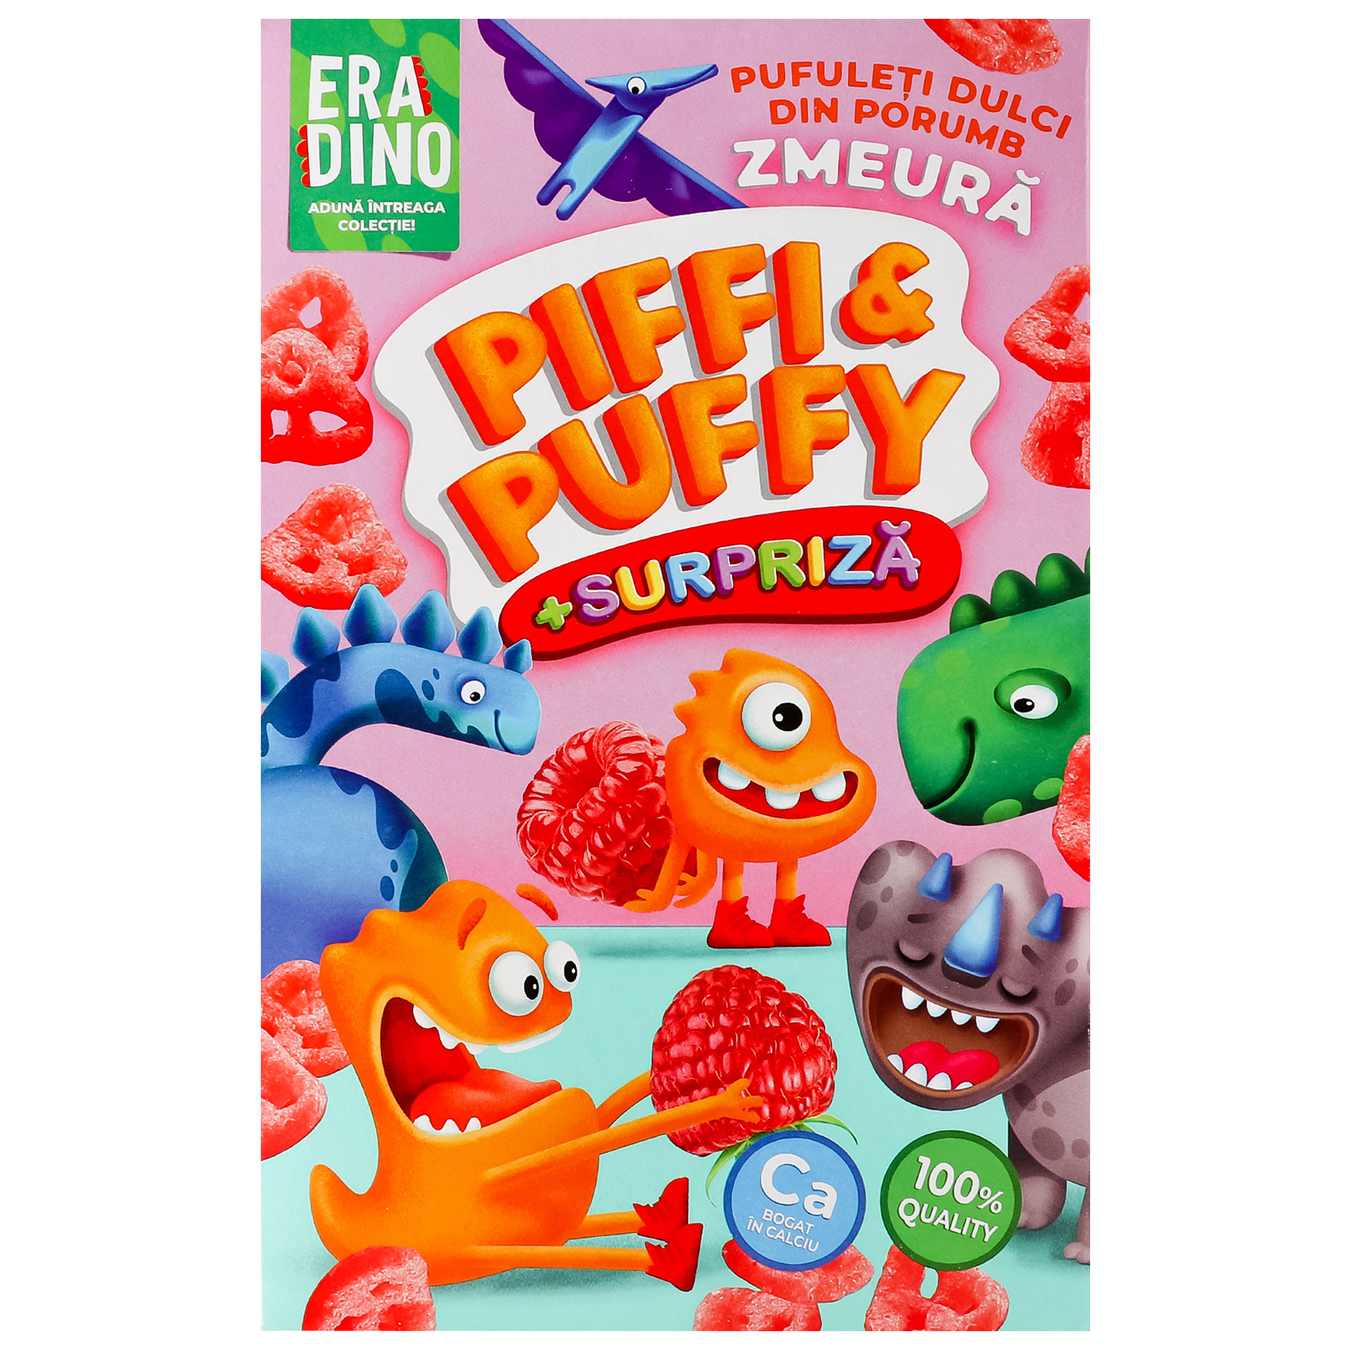 Piffi&Puffy corn sticks with a raspberry flavor with a surprise 90g